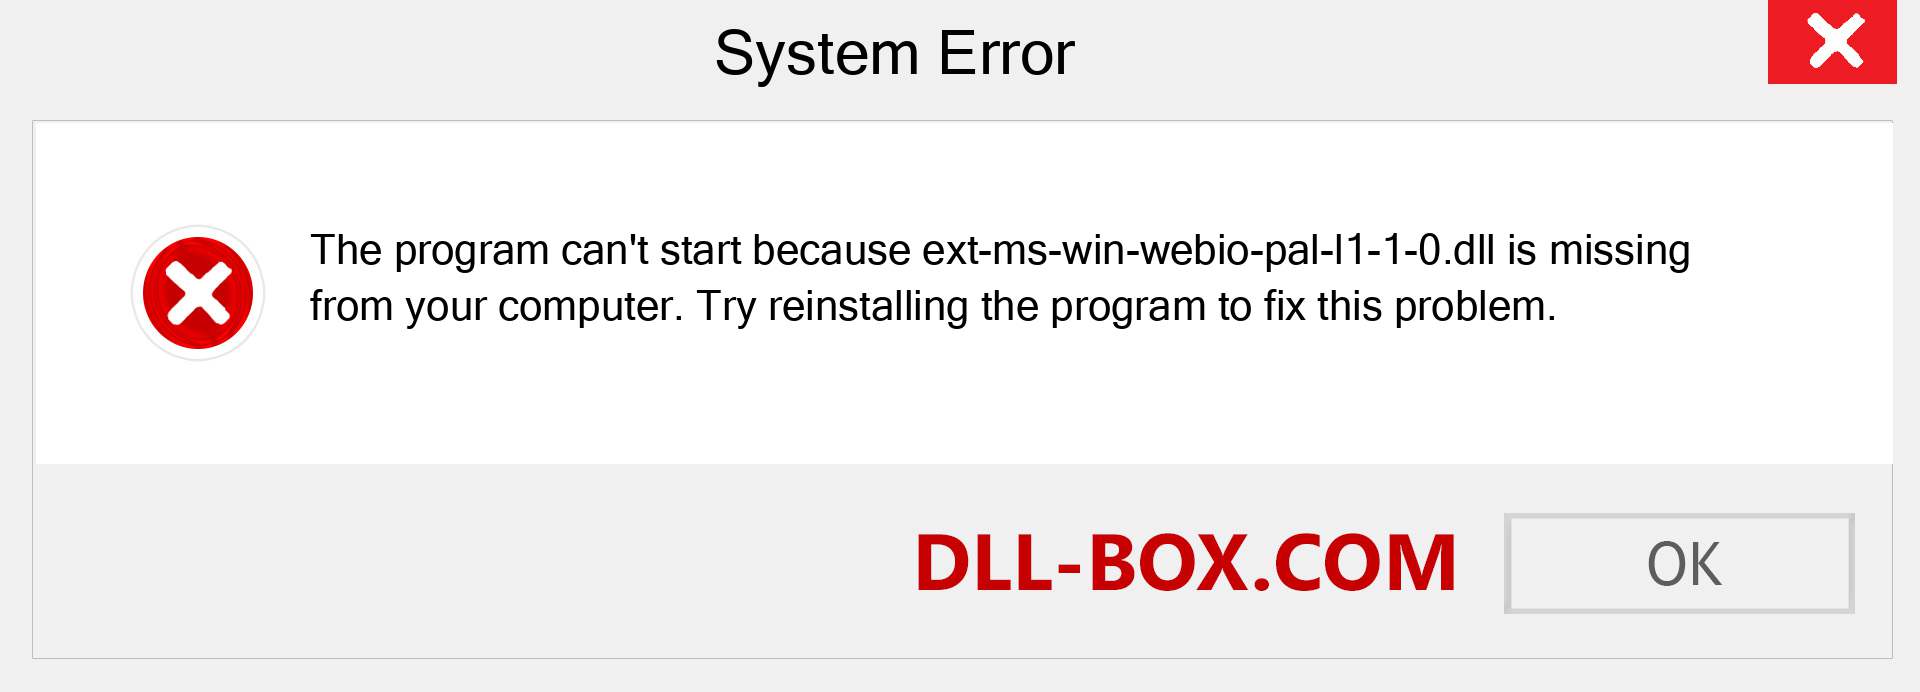  ext-ms-win-webio-pal-l1-1-0.dll file is missing?. Download for Windows 7, 8, 10 - Fix  ext-ms-win-webio-pal-l1-1-0 dll Missing Error on Windows, photos, images